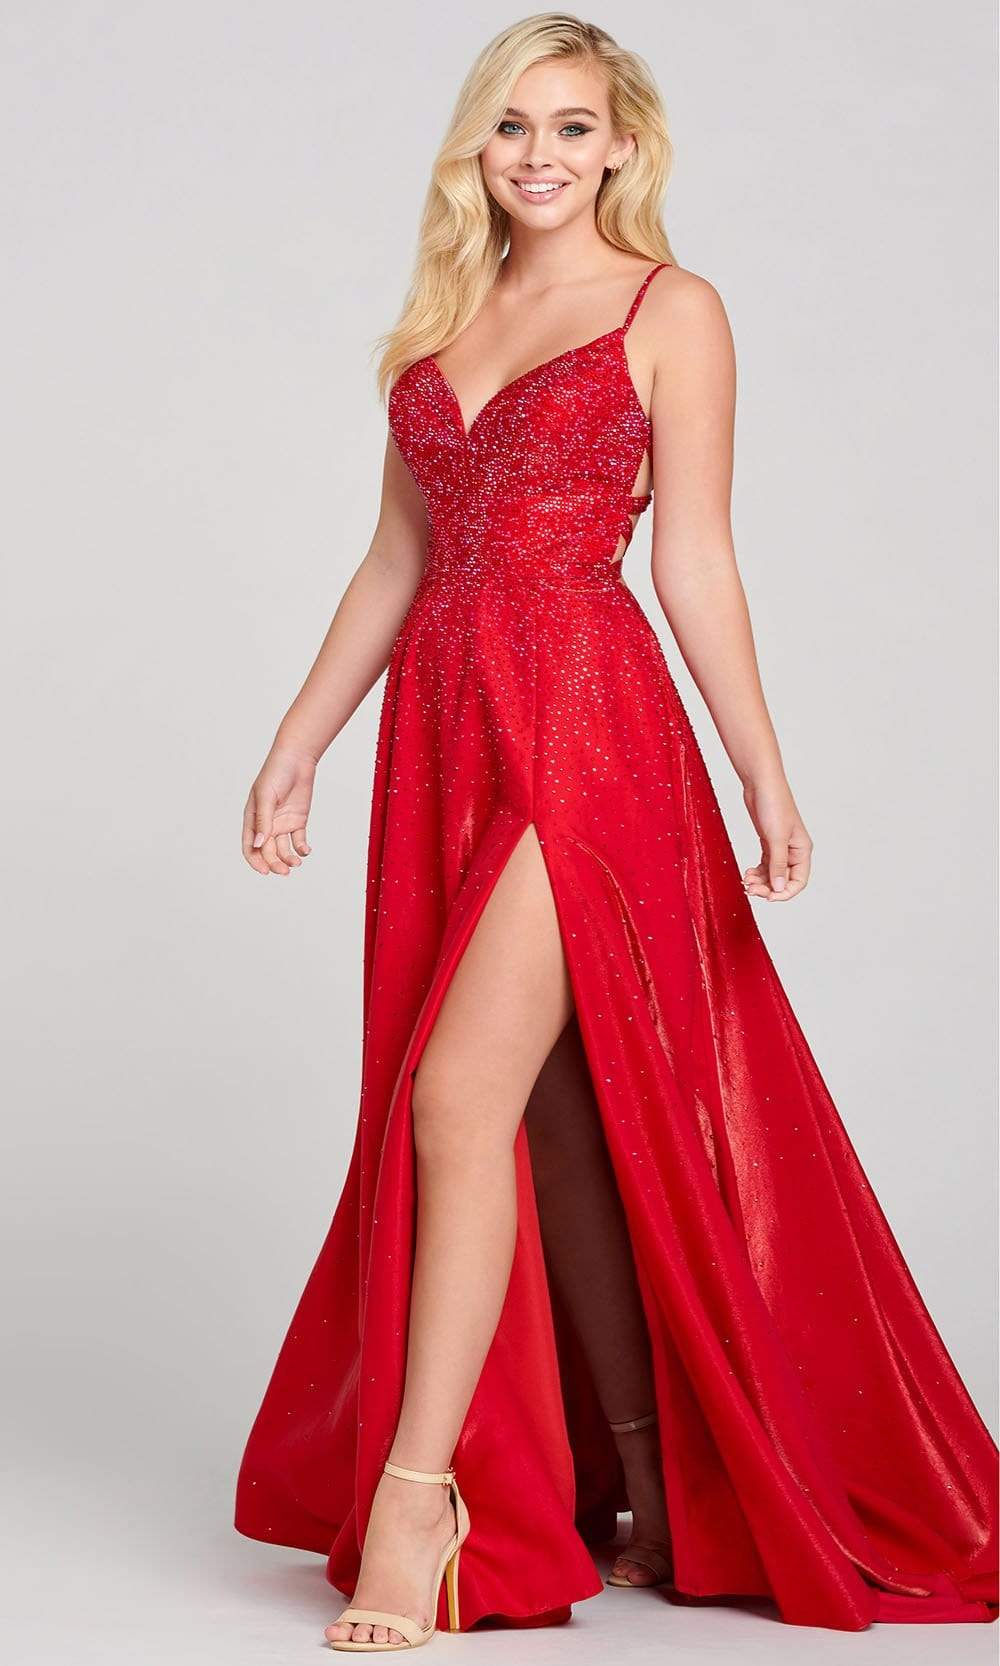 Ellie Wilde - EW121001 Strappy Open Back Crystal Studded Satin Gown Prom Dresses 00 / Ruby